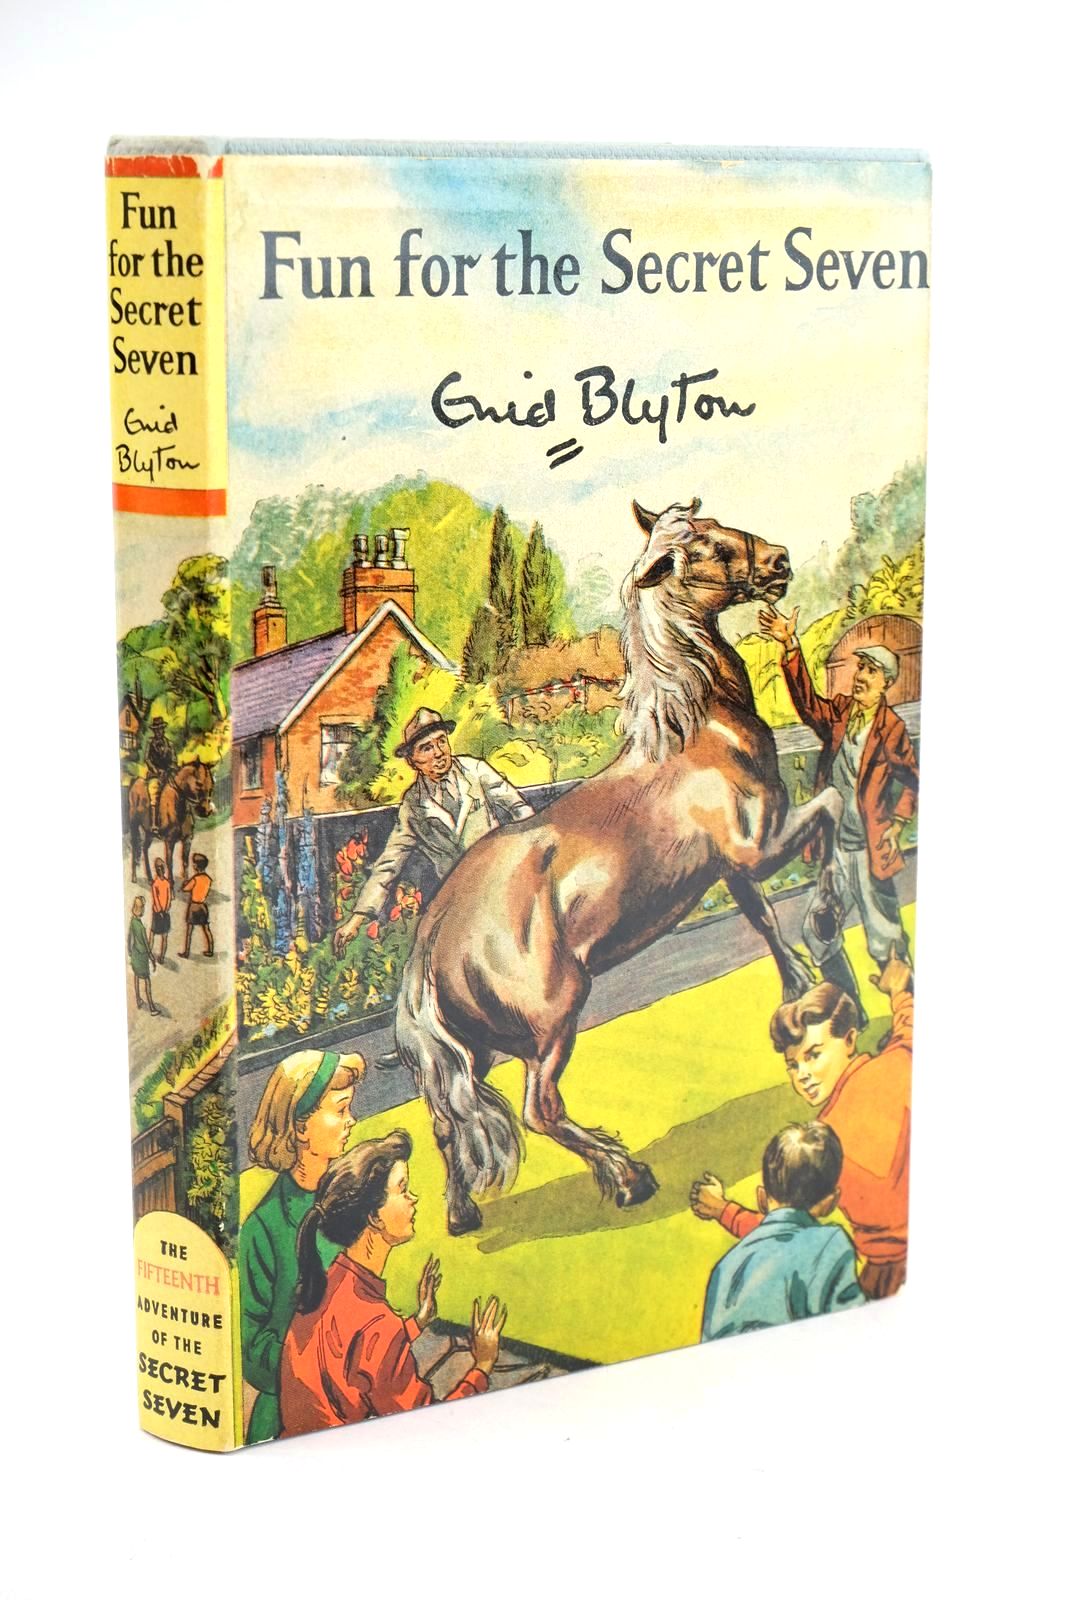 Photo of FUN FOR THE SECRET SEVEN written by Blyton, Enid illustrated by Sharrocks, Burgess published by Brockhampton Press Ltd. (STOCK CODE: 1324552)  for sale by Stella & Rose's Books